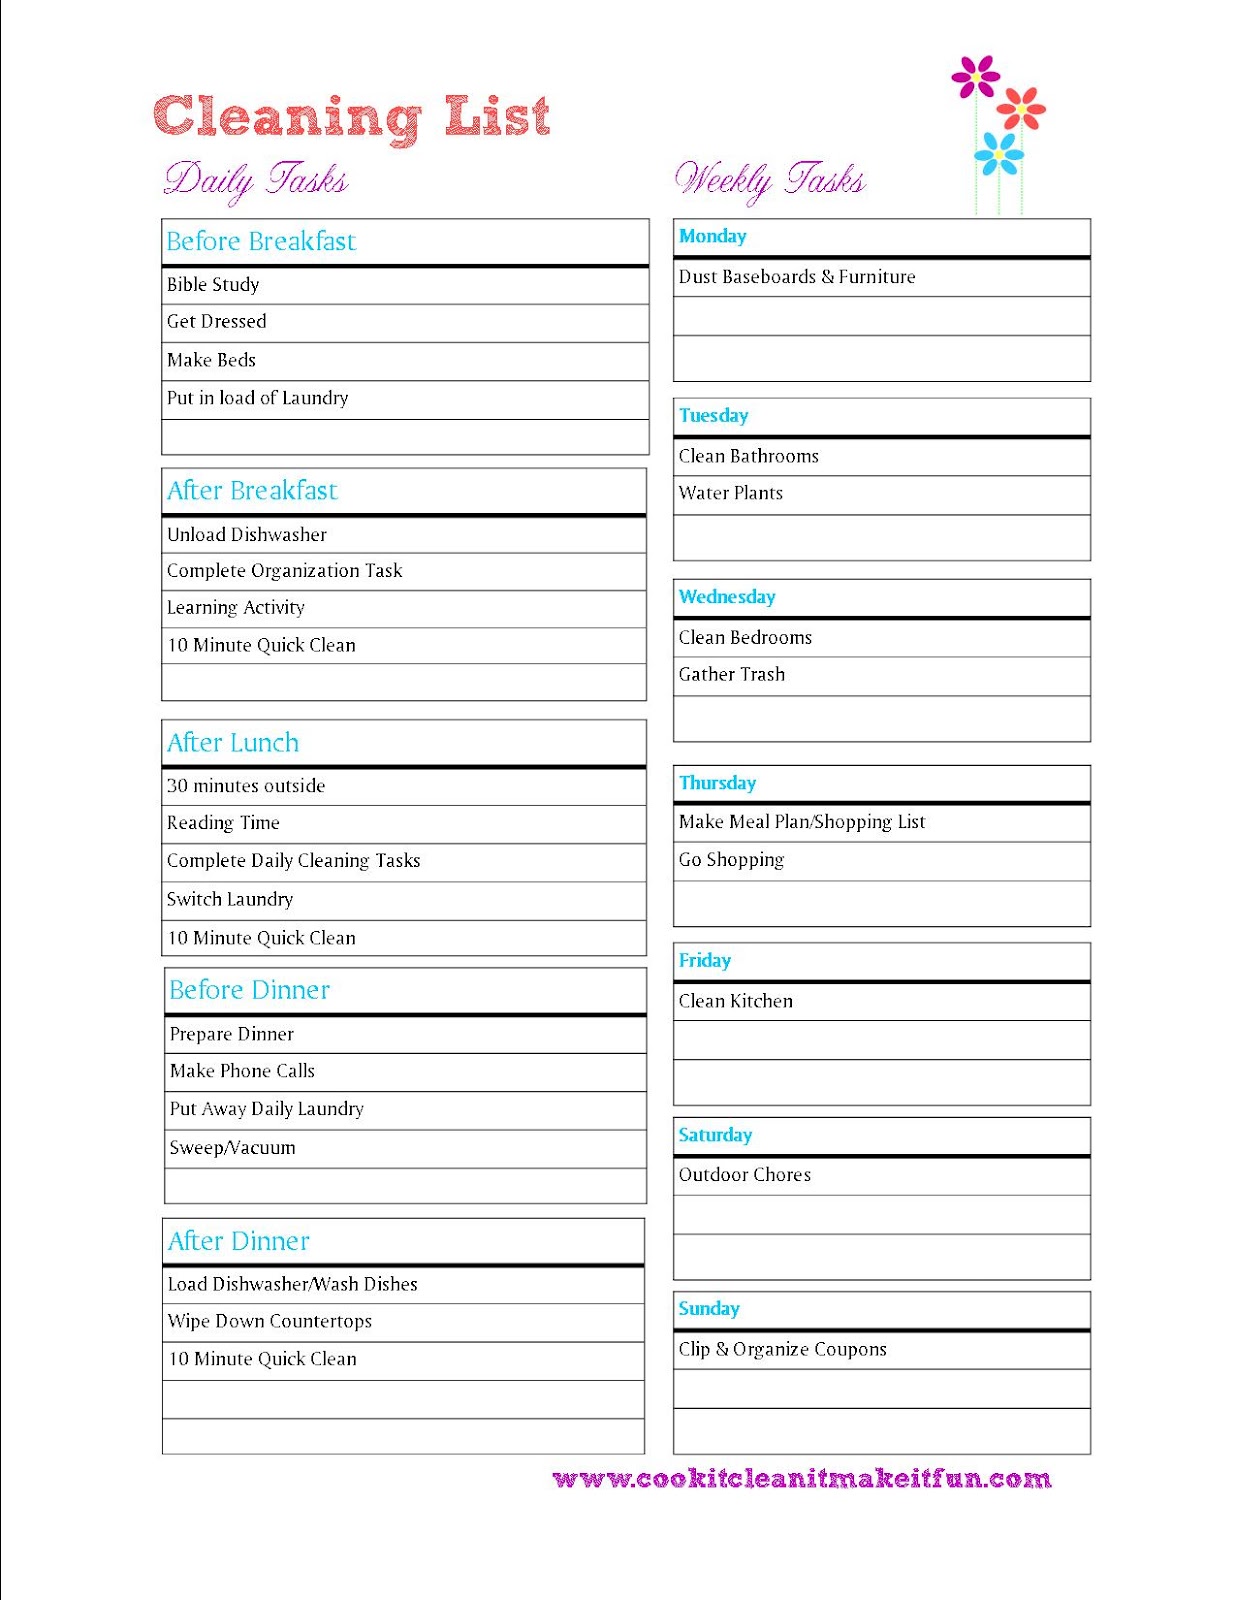 Cleaning Schedule With Free Printable Tools